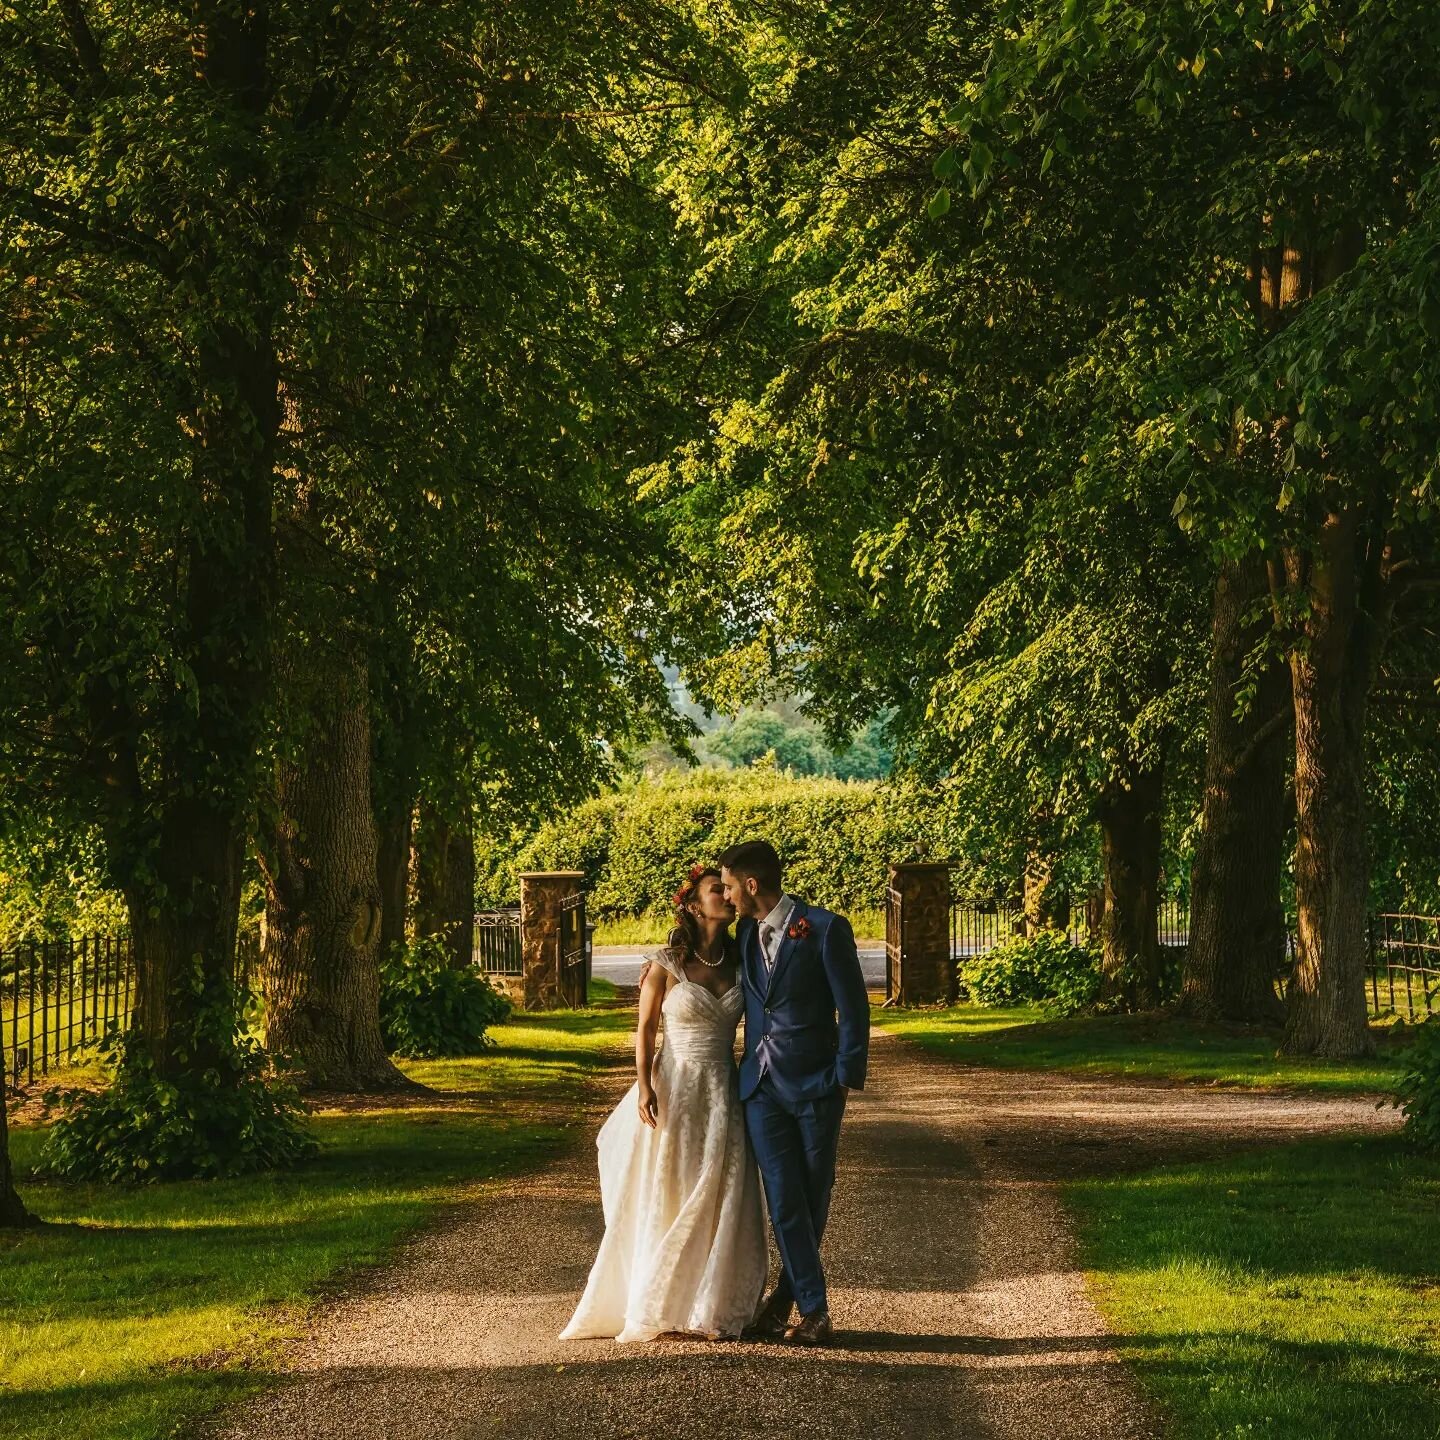 Gaydeliya 🫶🏼 Stephen

A lovely spot for some golden hour photos at @plumparkhotel - A stunning venue in Towcester that I''d highly recommend couples take a look at!

#weddingsin2023 #ourwedding #mywedding  #plumparkmanor #plumparkhotel #plumparkwed